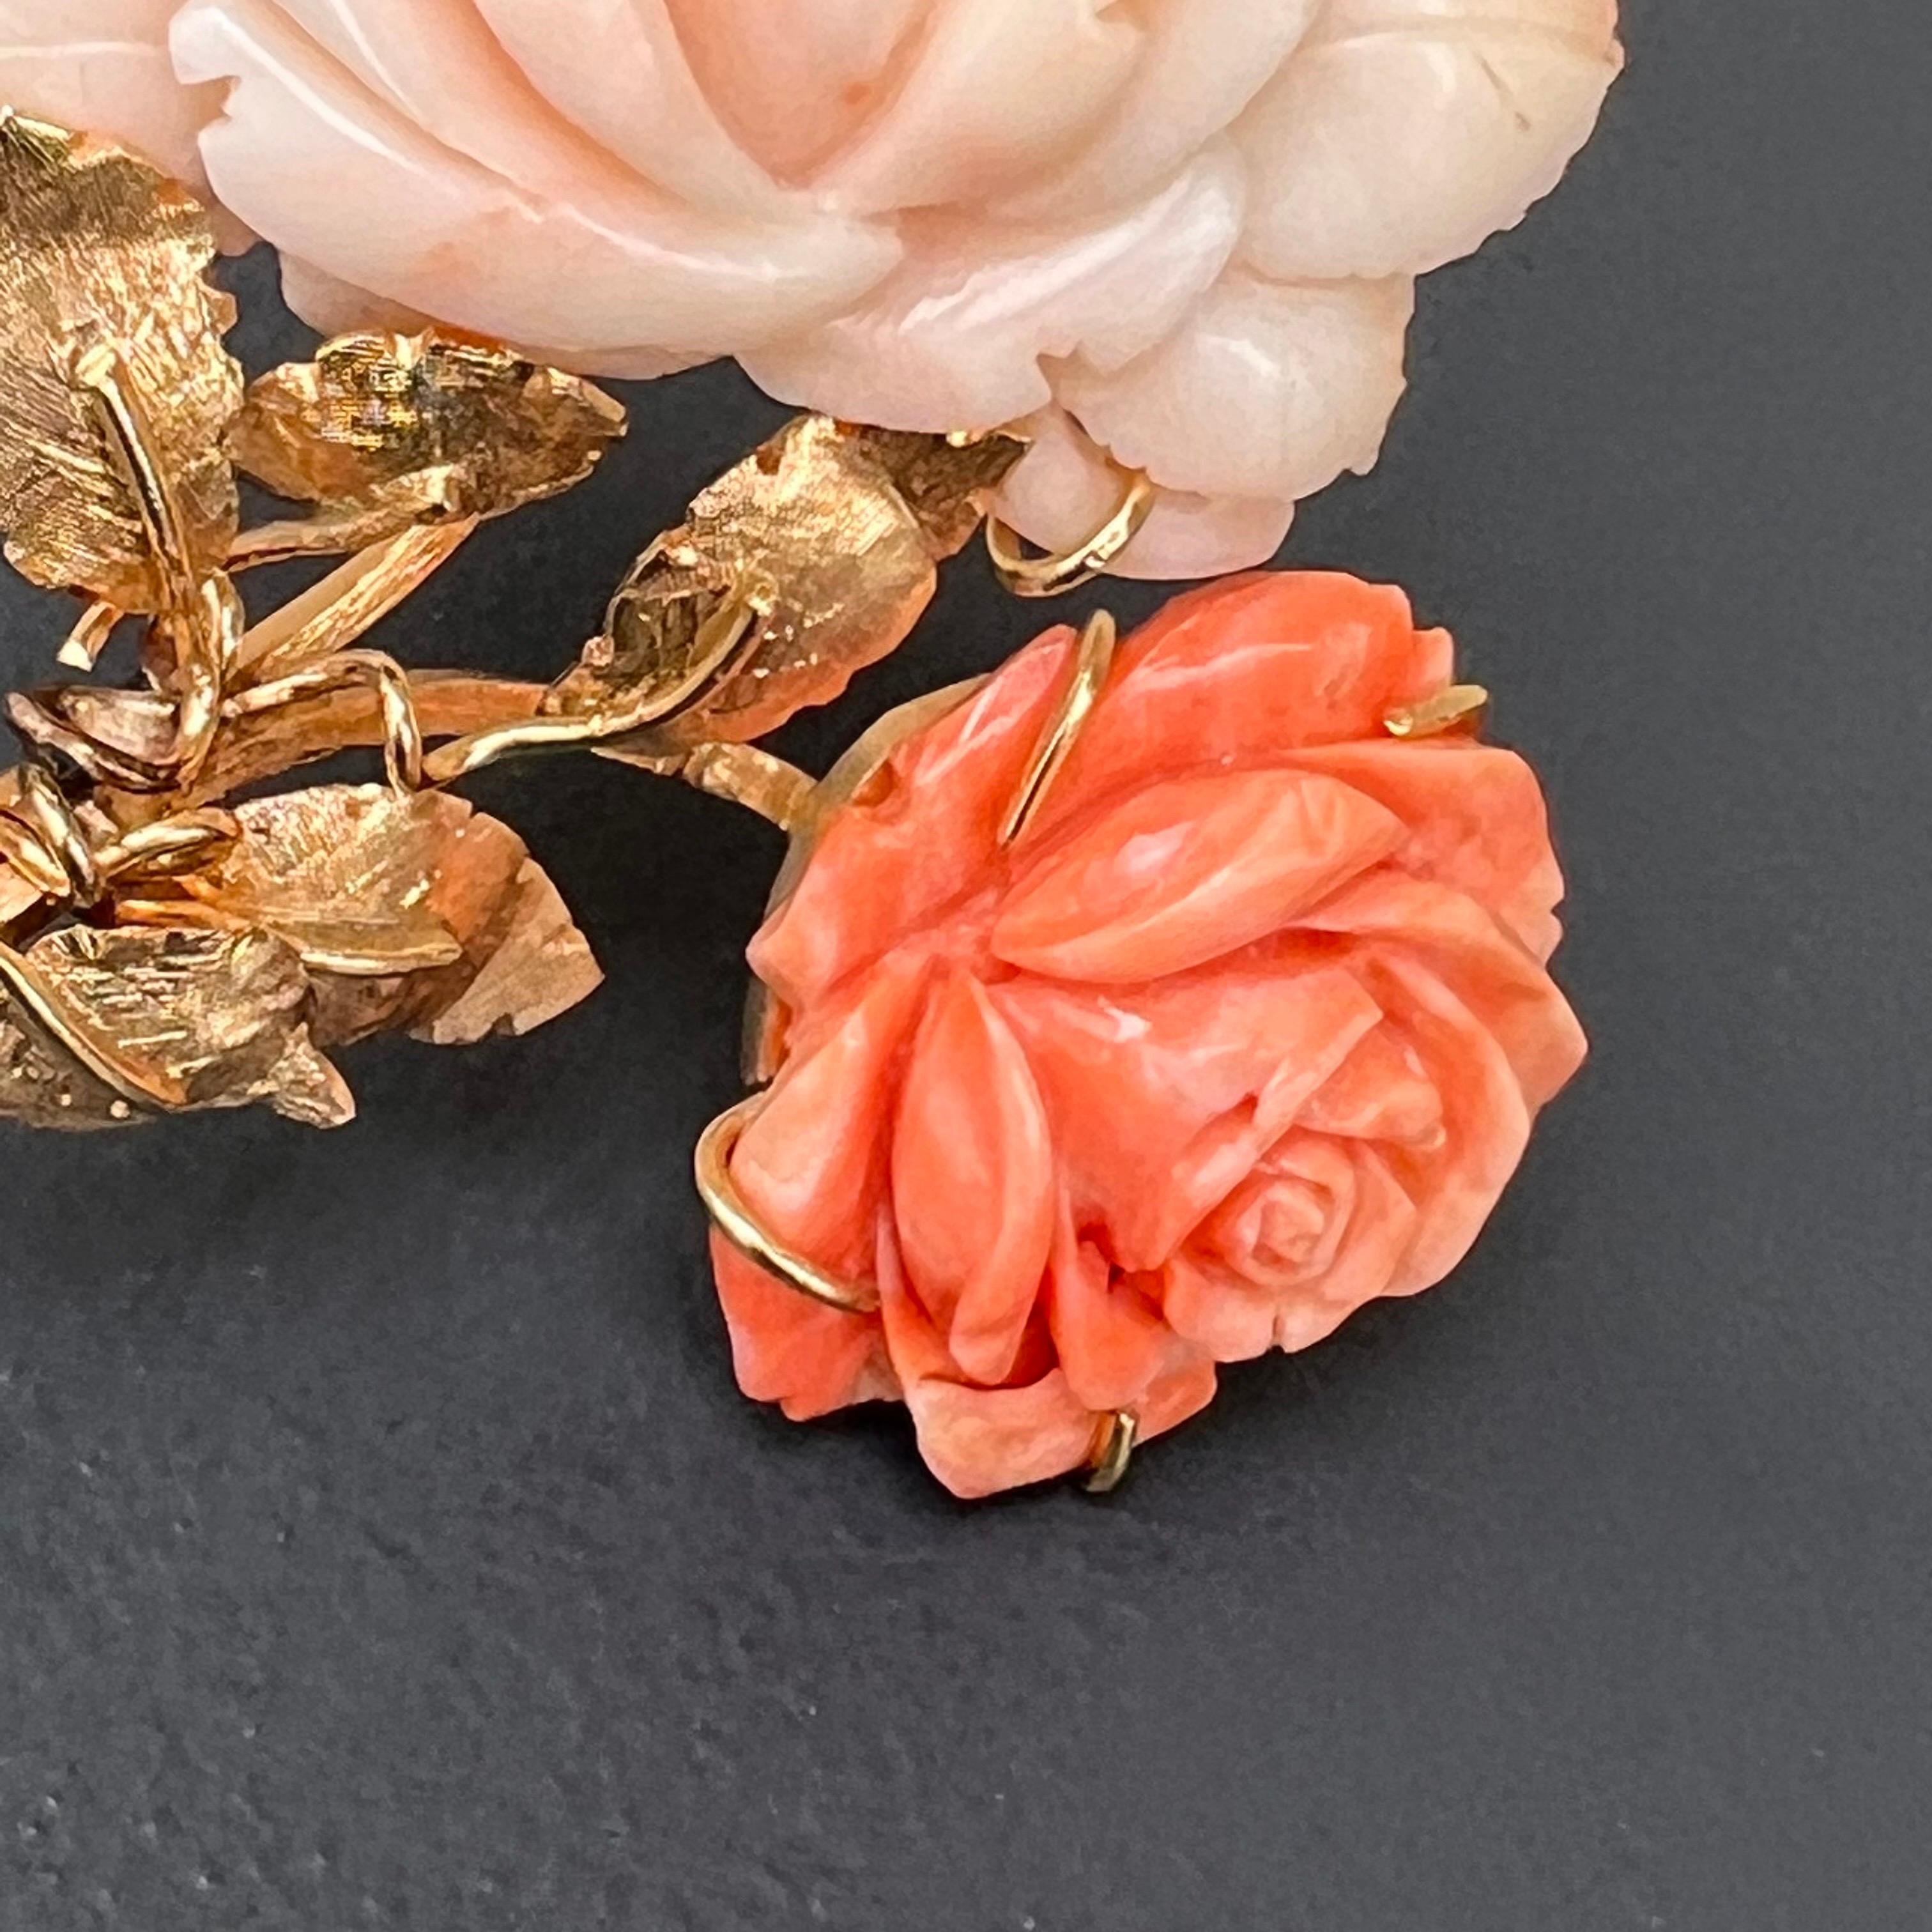 Large 14 Karat Gold Carved Coral Rose Floral Pin Brooch In Good Condition For Sale In Plainsboro, NJ